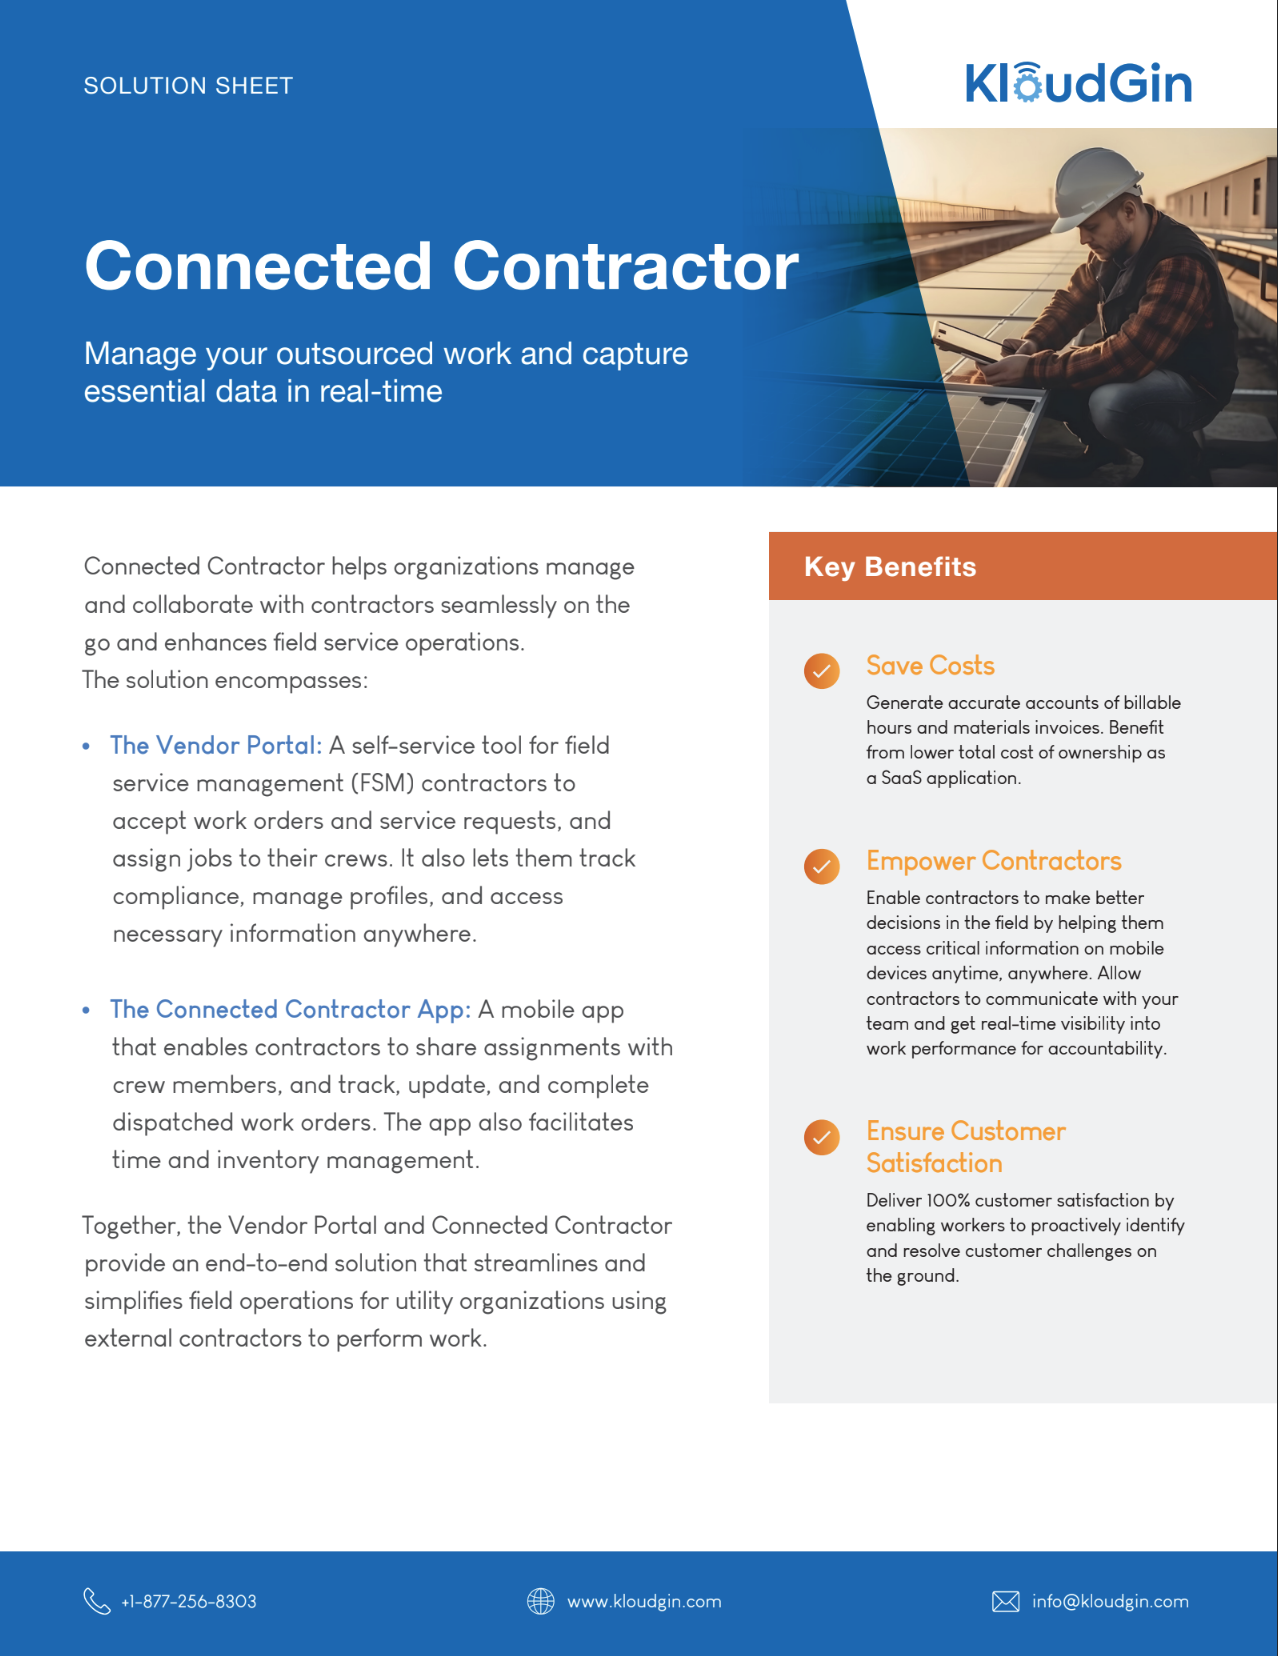 Connected Contractor